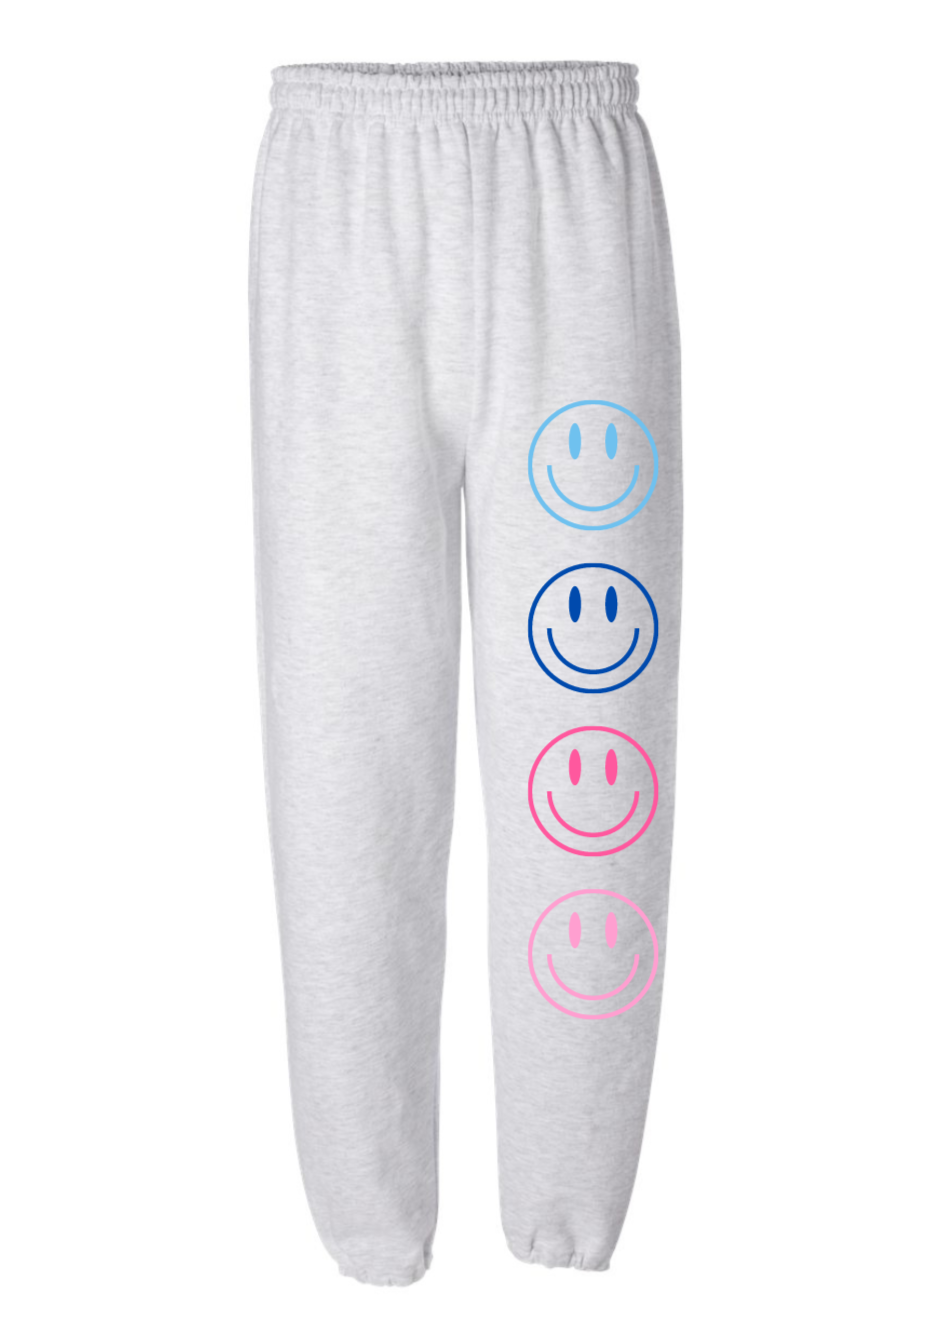 blue+pink smiley jogger style sweatpants